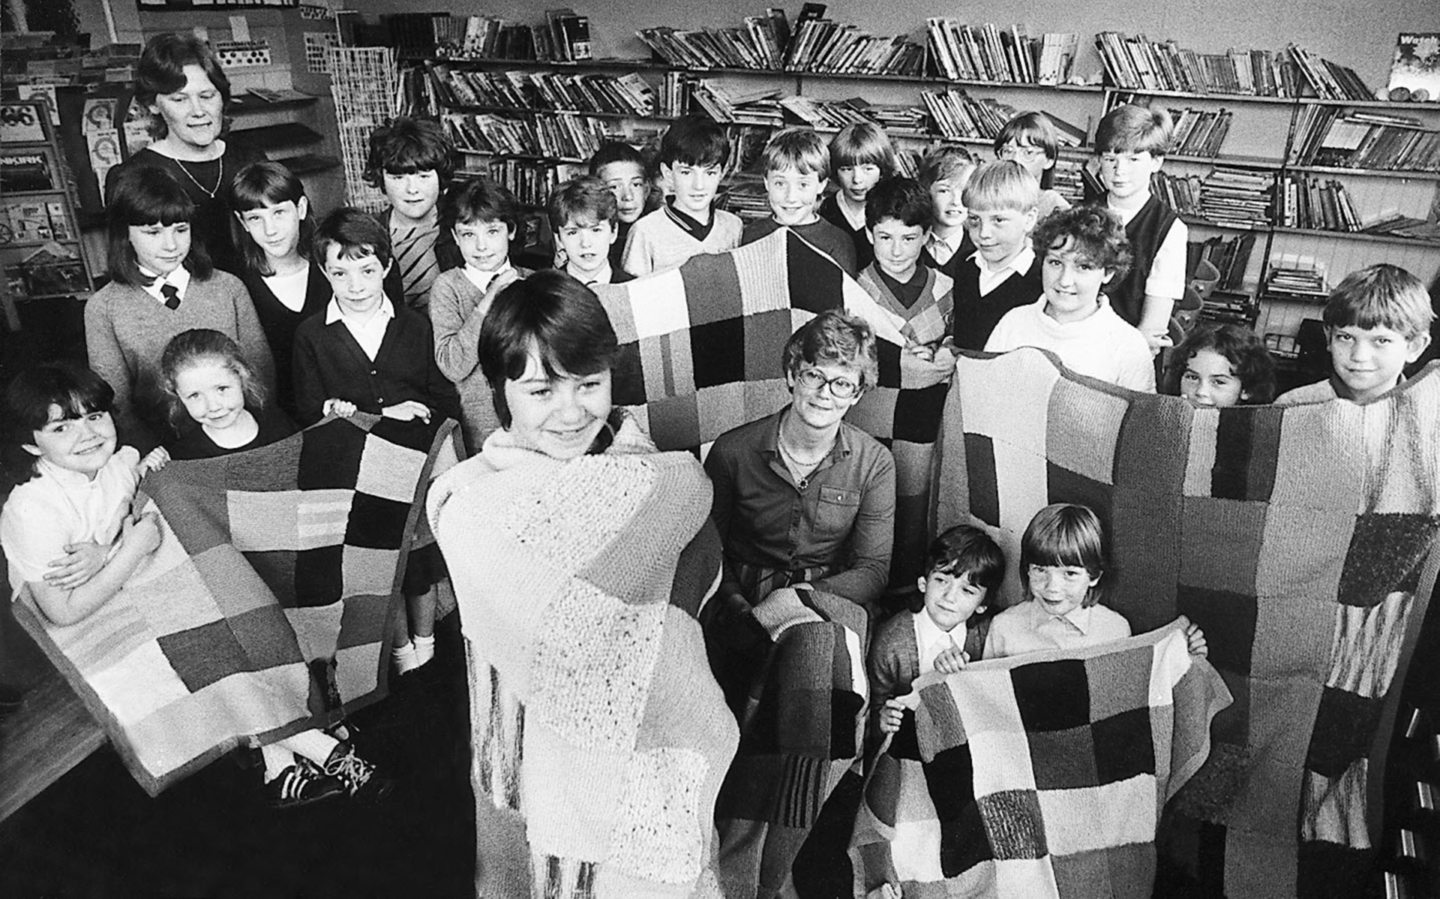 Talented pupils from the Aberdeen school with the blankets and vests they knitted for Save The Children in 1985.